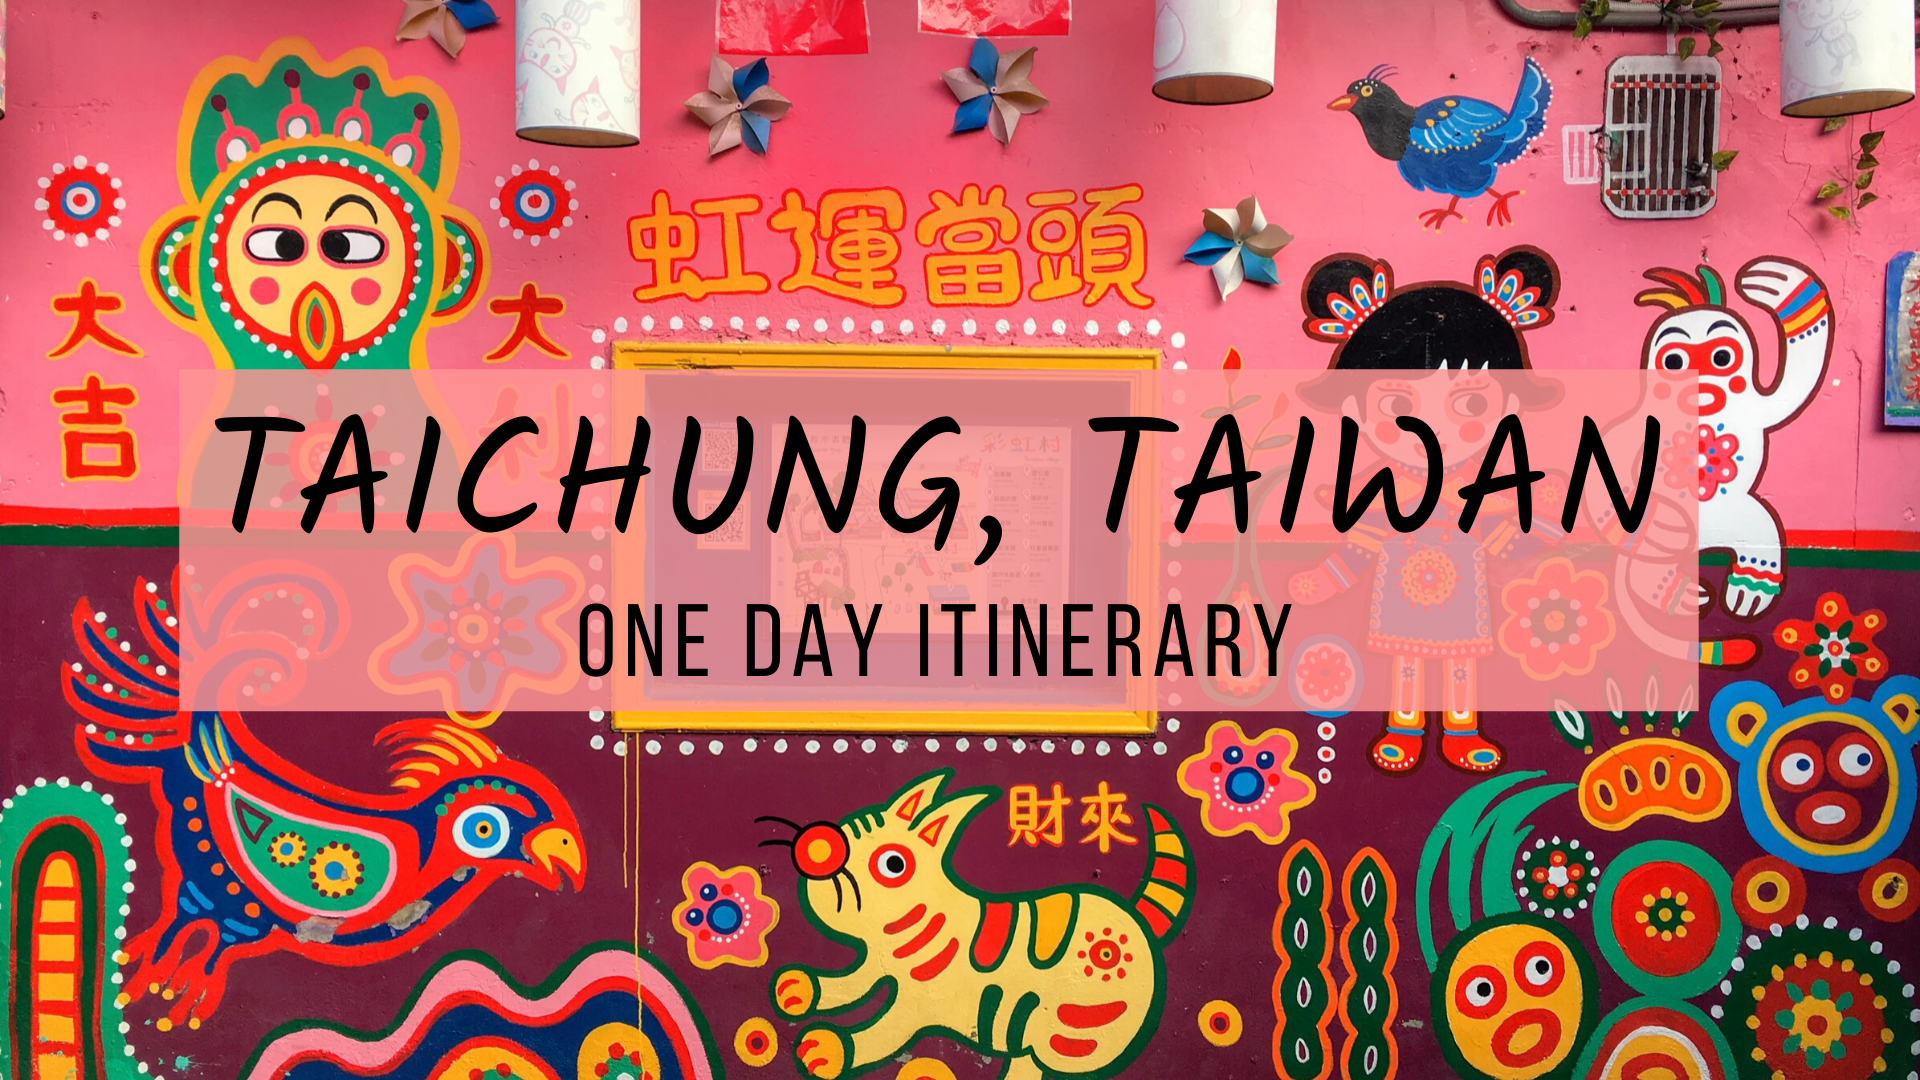 Taichung itinerary one day, one day in Taichung itinerary, one day Taichung DIY itinerary, things to do in Taichung, Taichung travel guide, rainbow village, bubble tea, night market cover